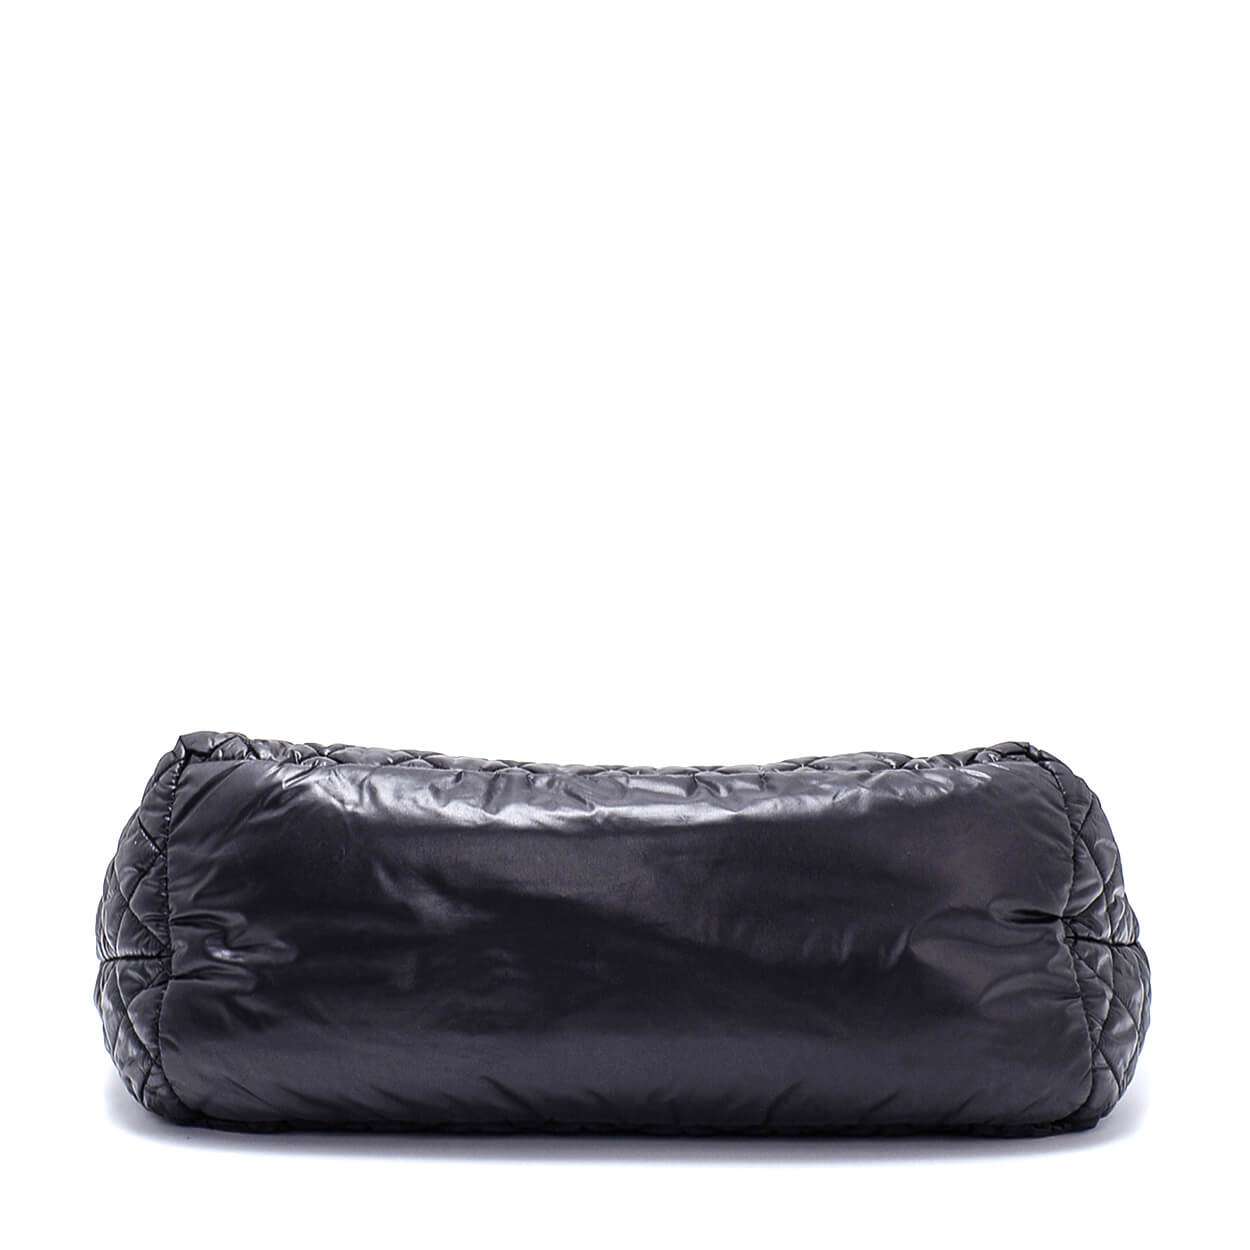 Chanel - Black Nylon Quilted Cocoon Shopping Bag